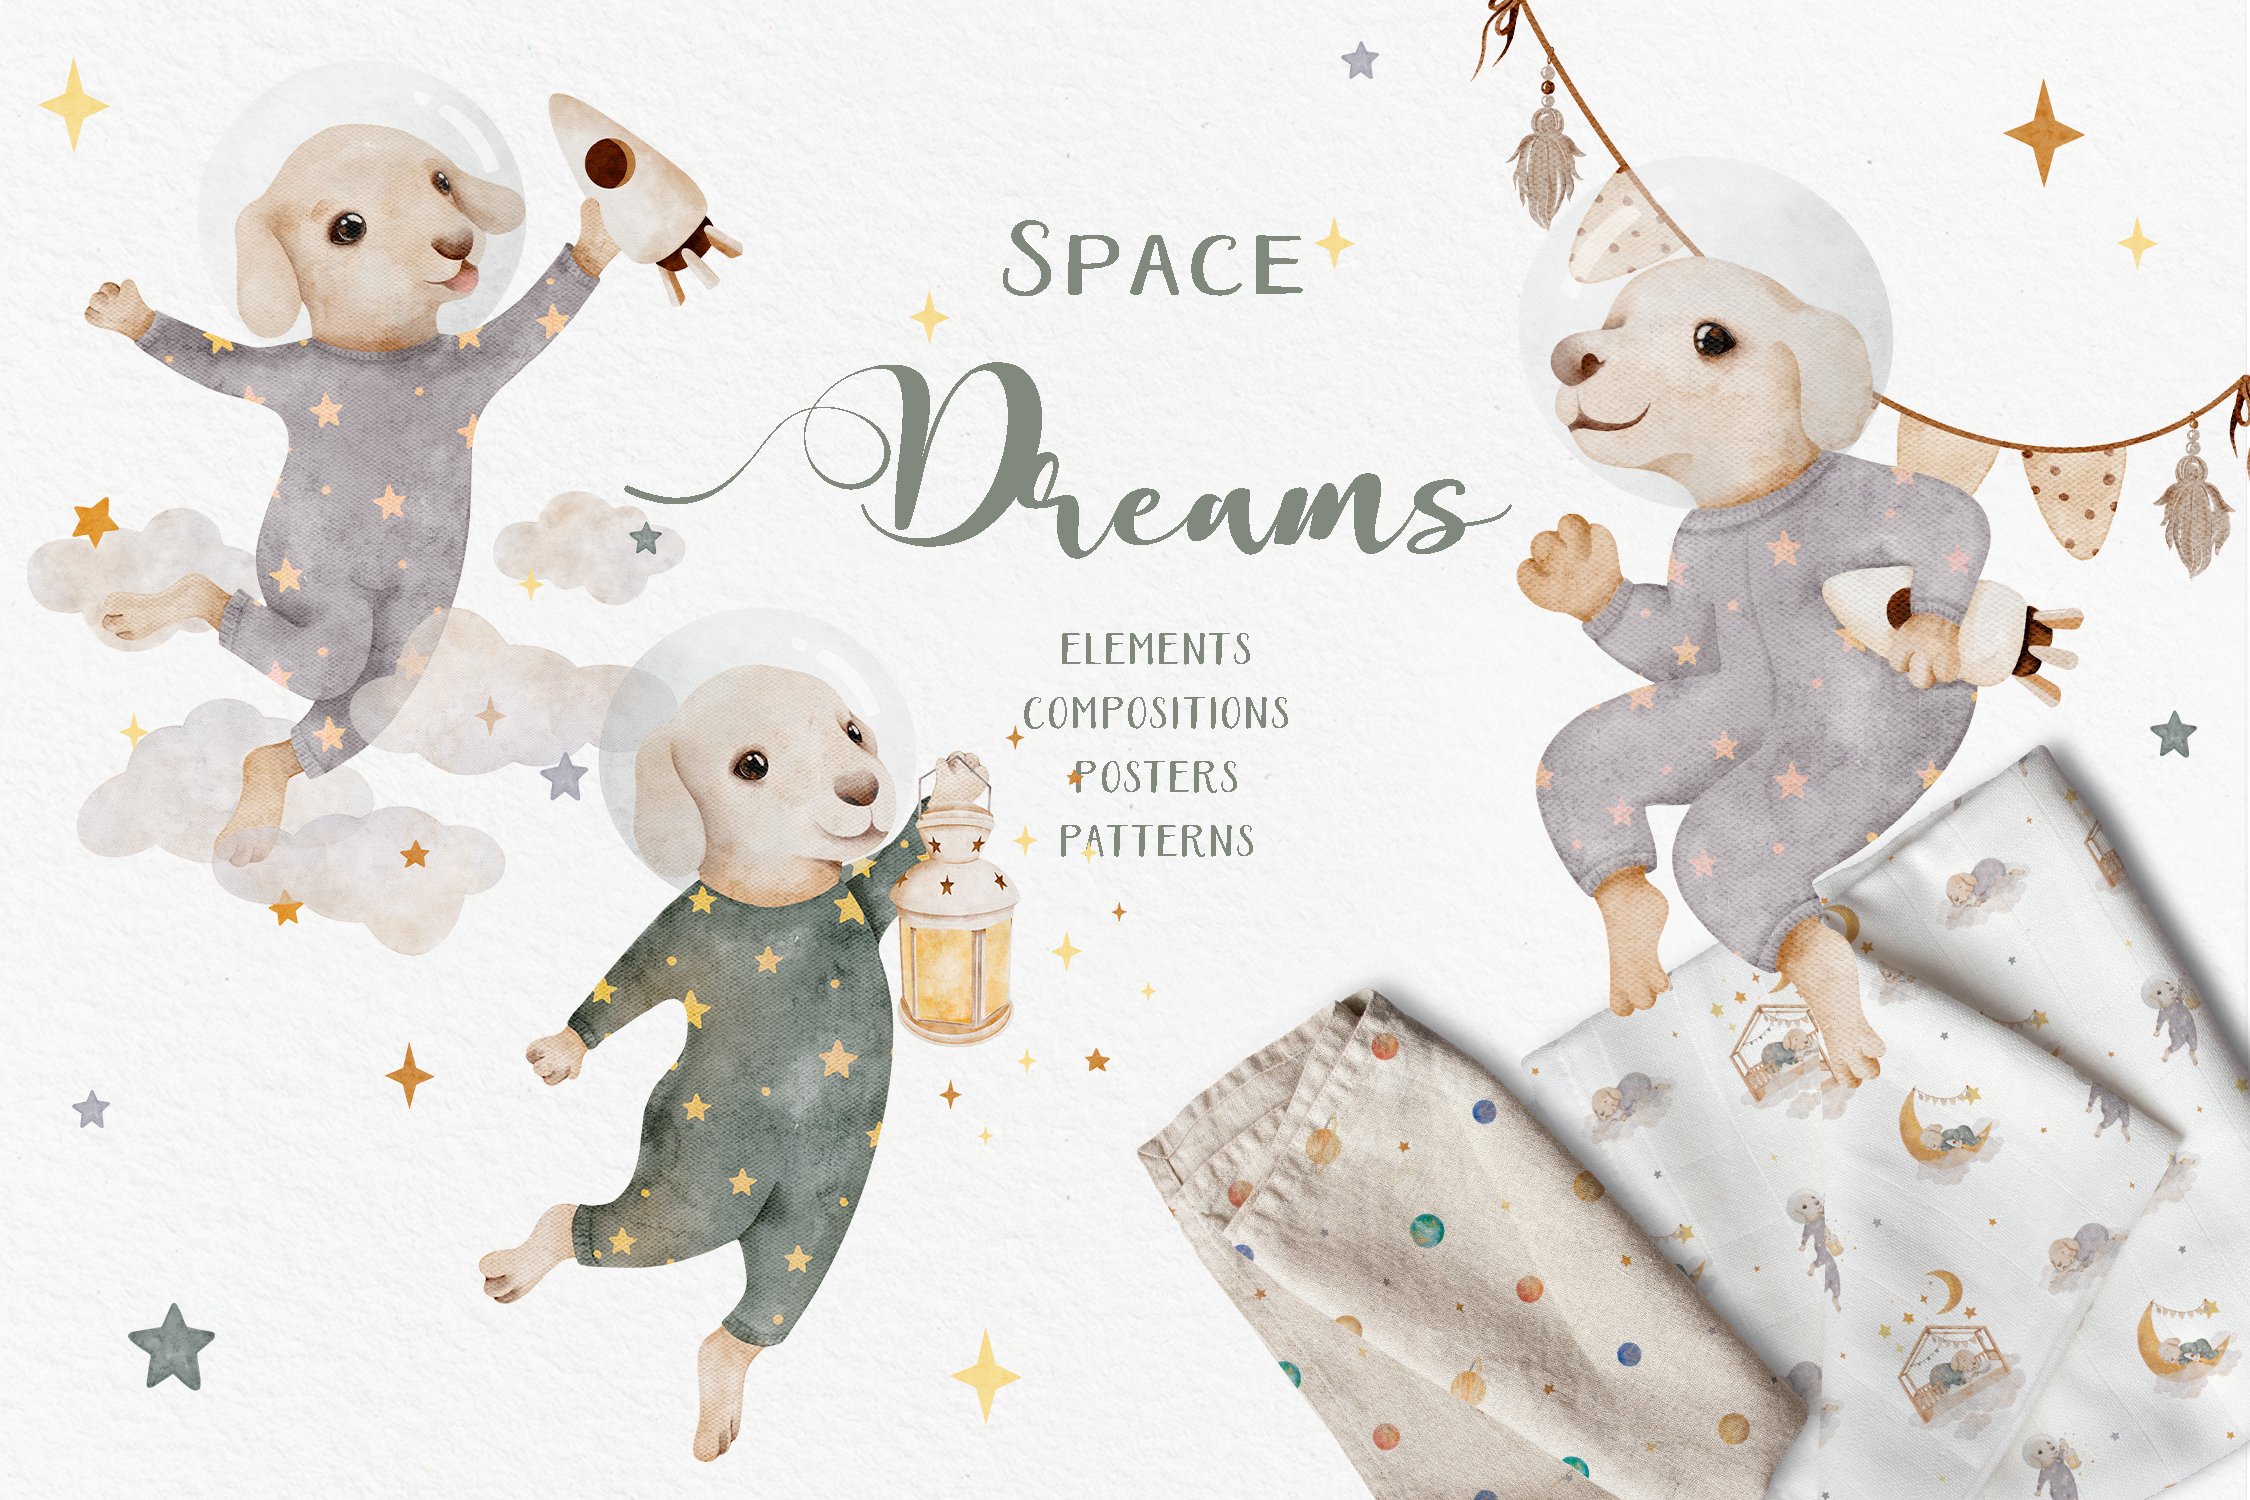 Space Dreams cover image.